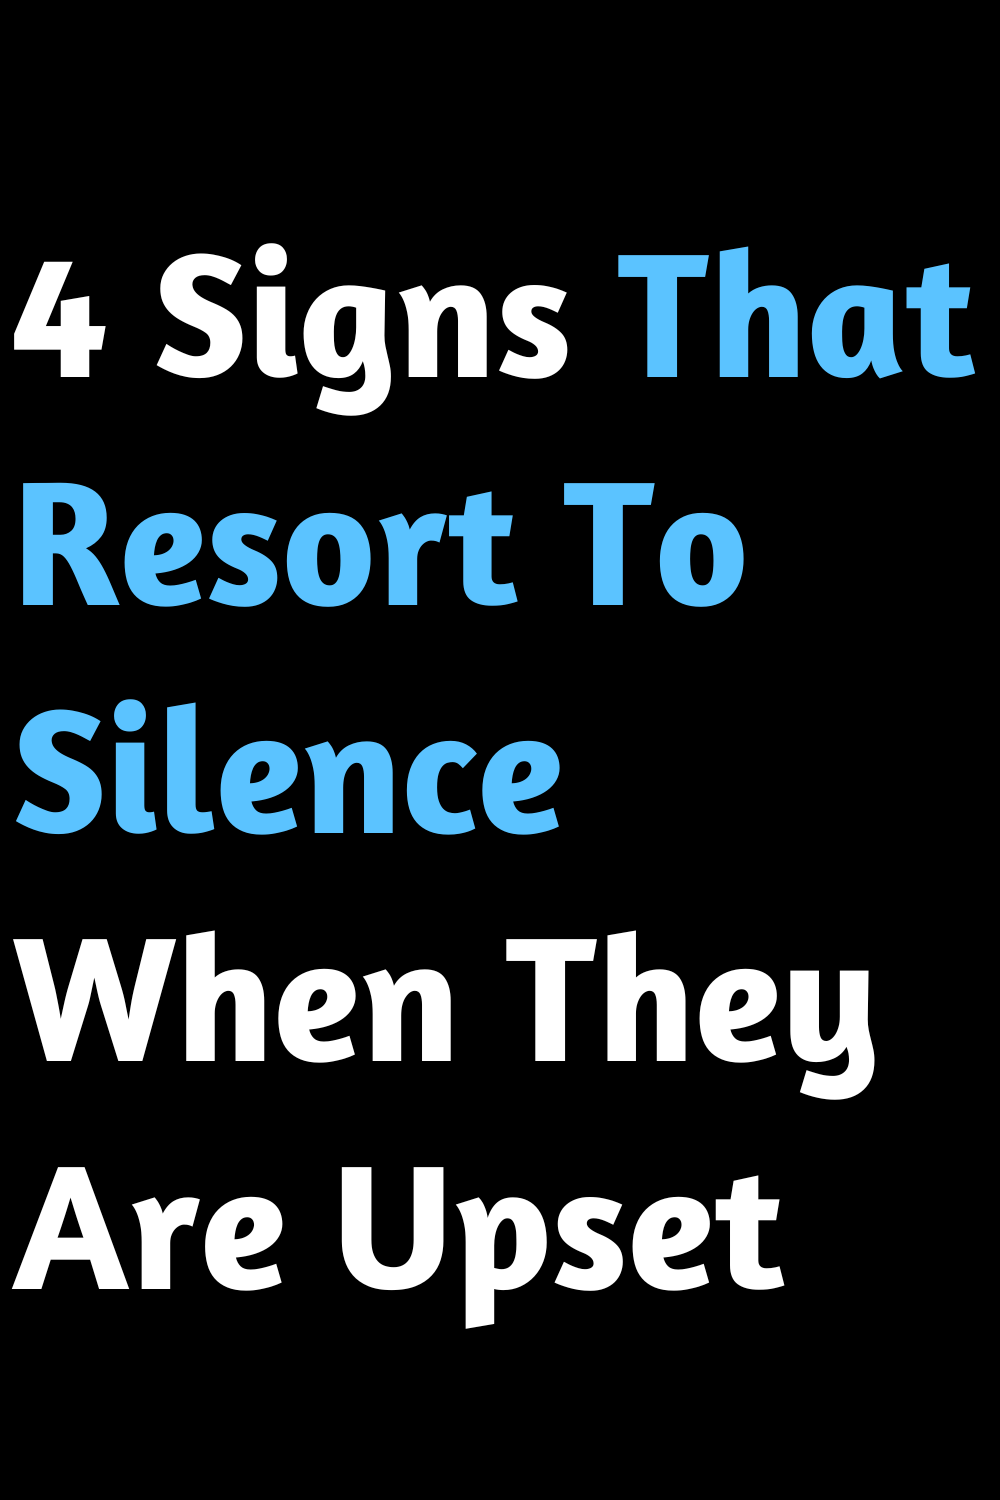 4 Signs That Resort To Silence When They Are Upset